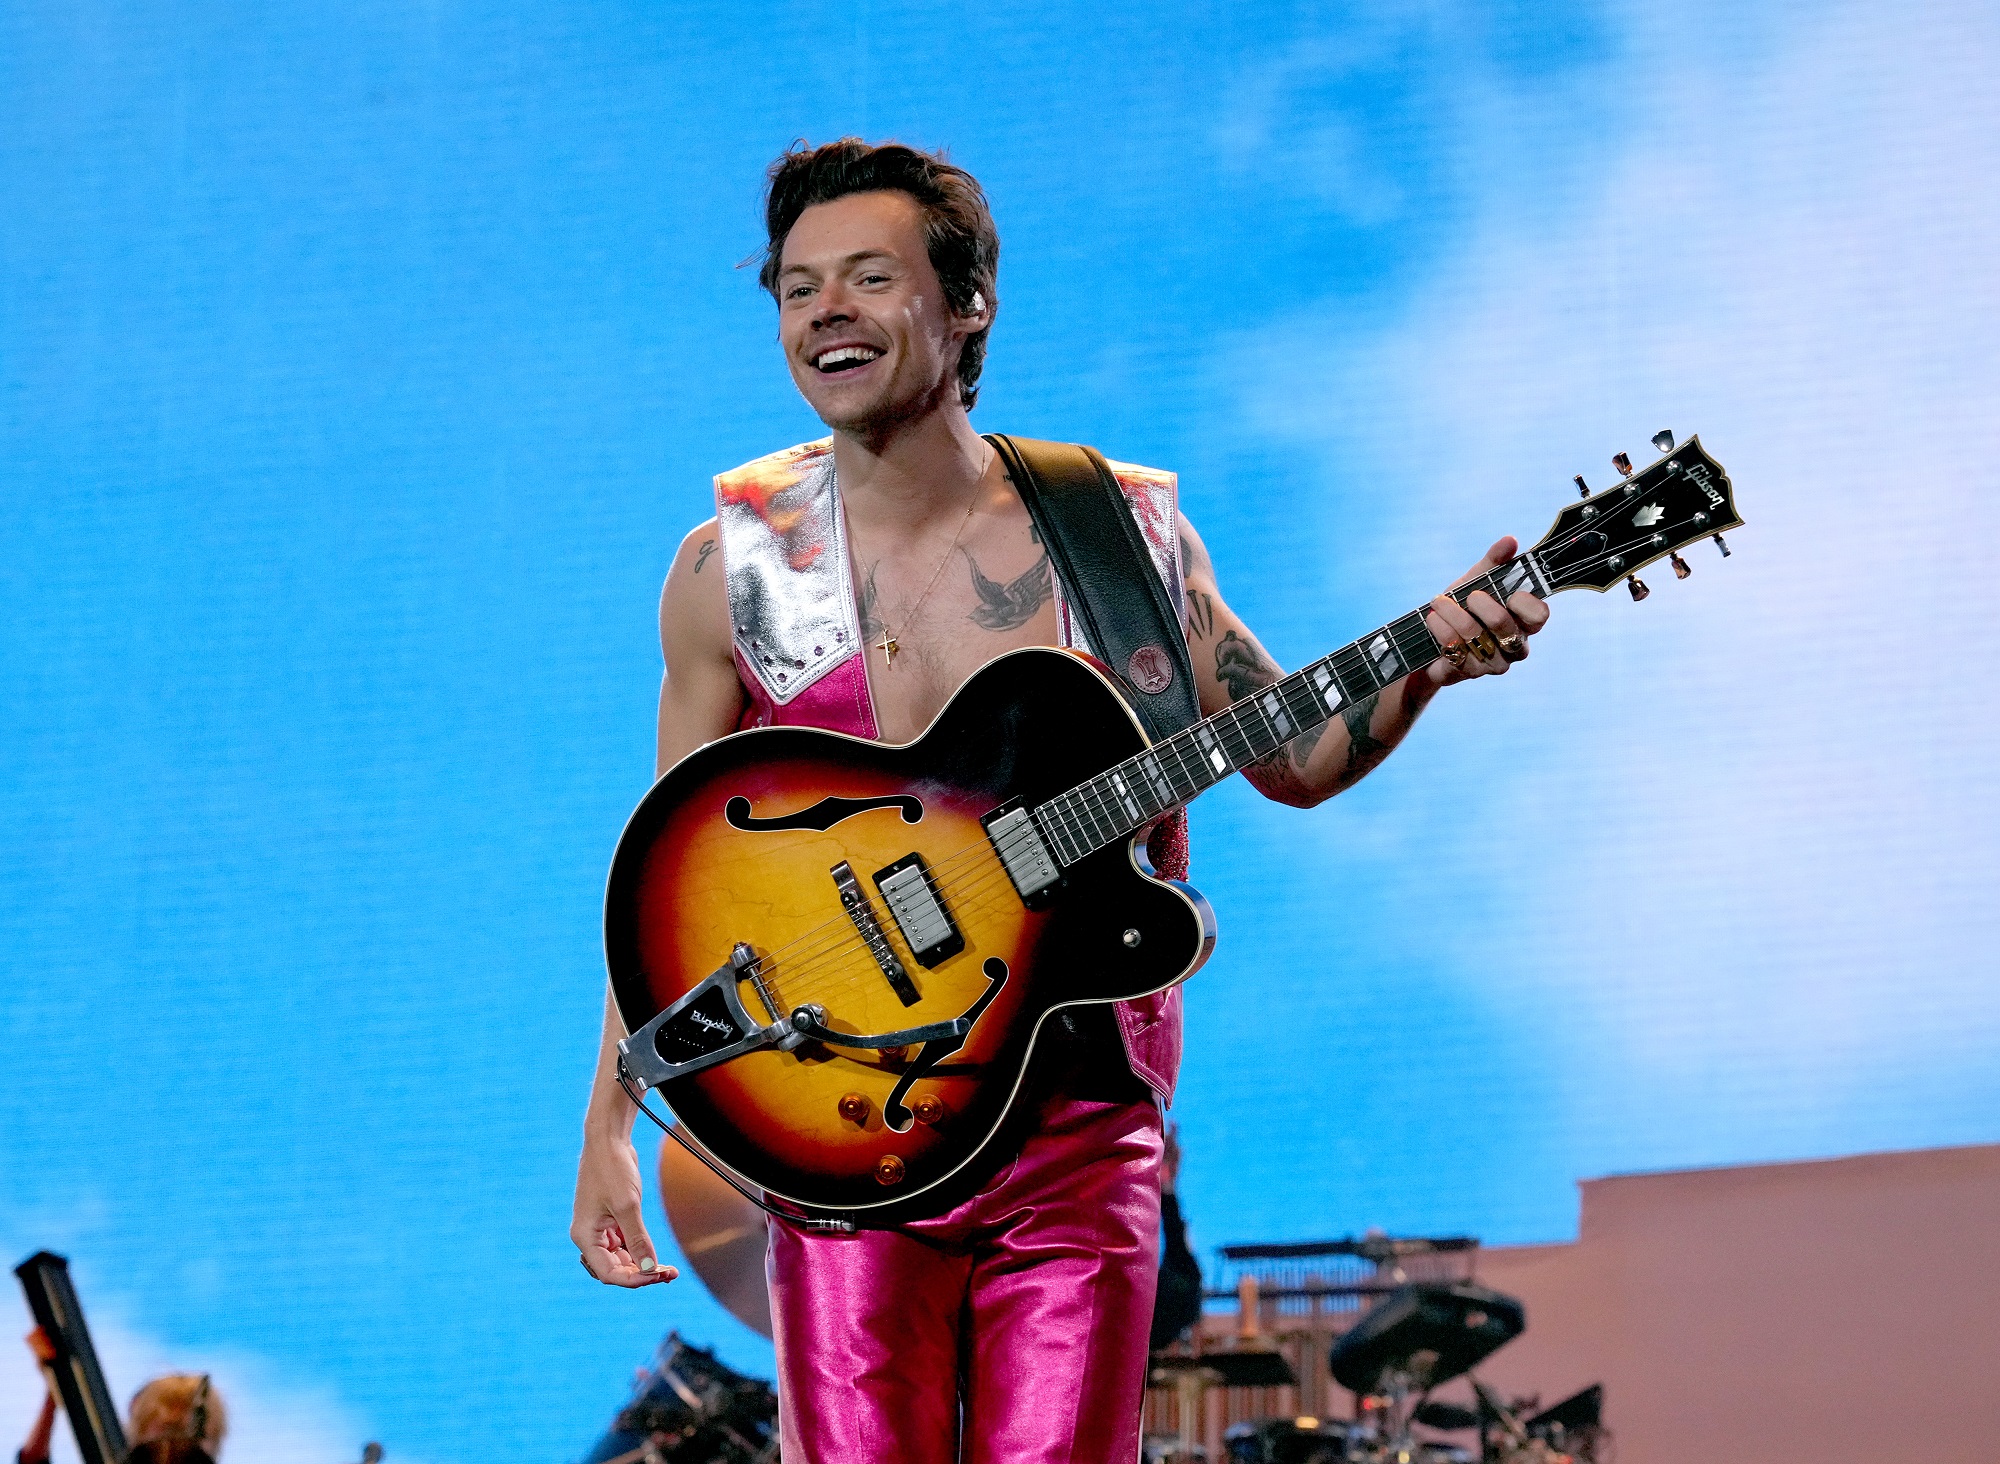 Harry Styles onstage at the the 2022 Coachella Valley Music And Arts Festival